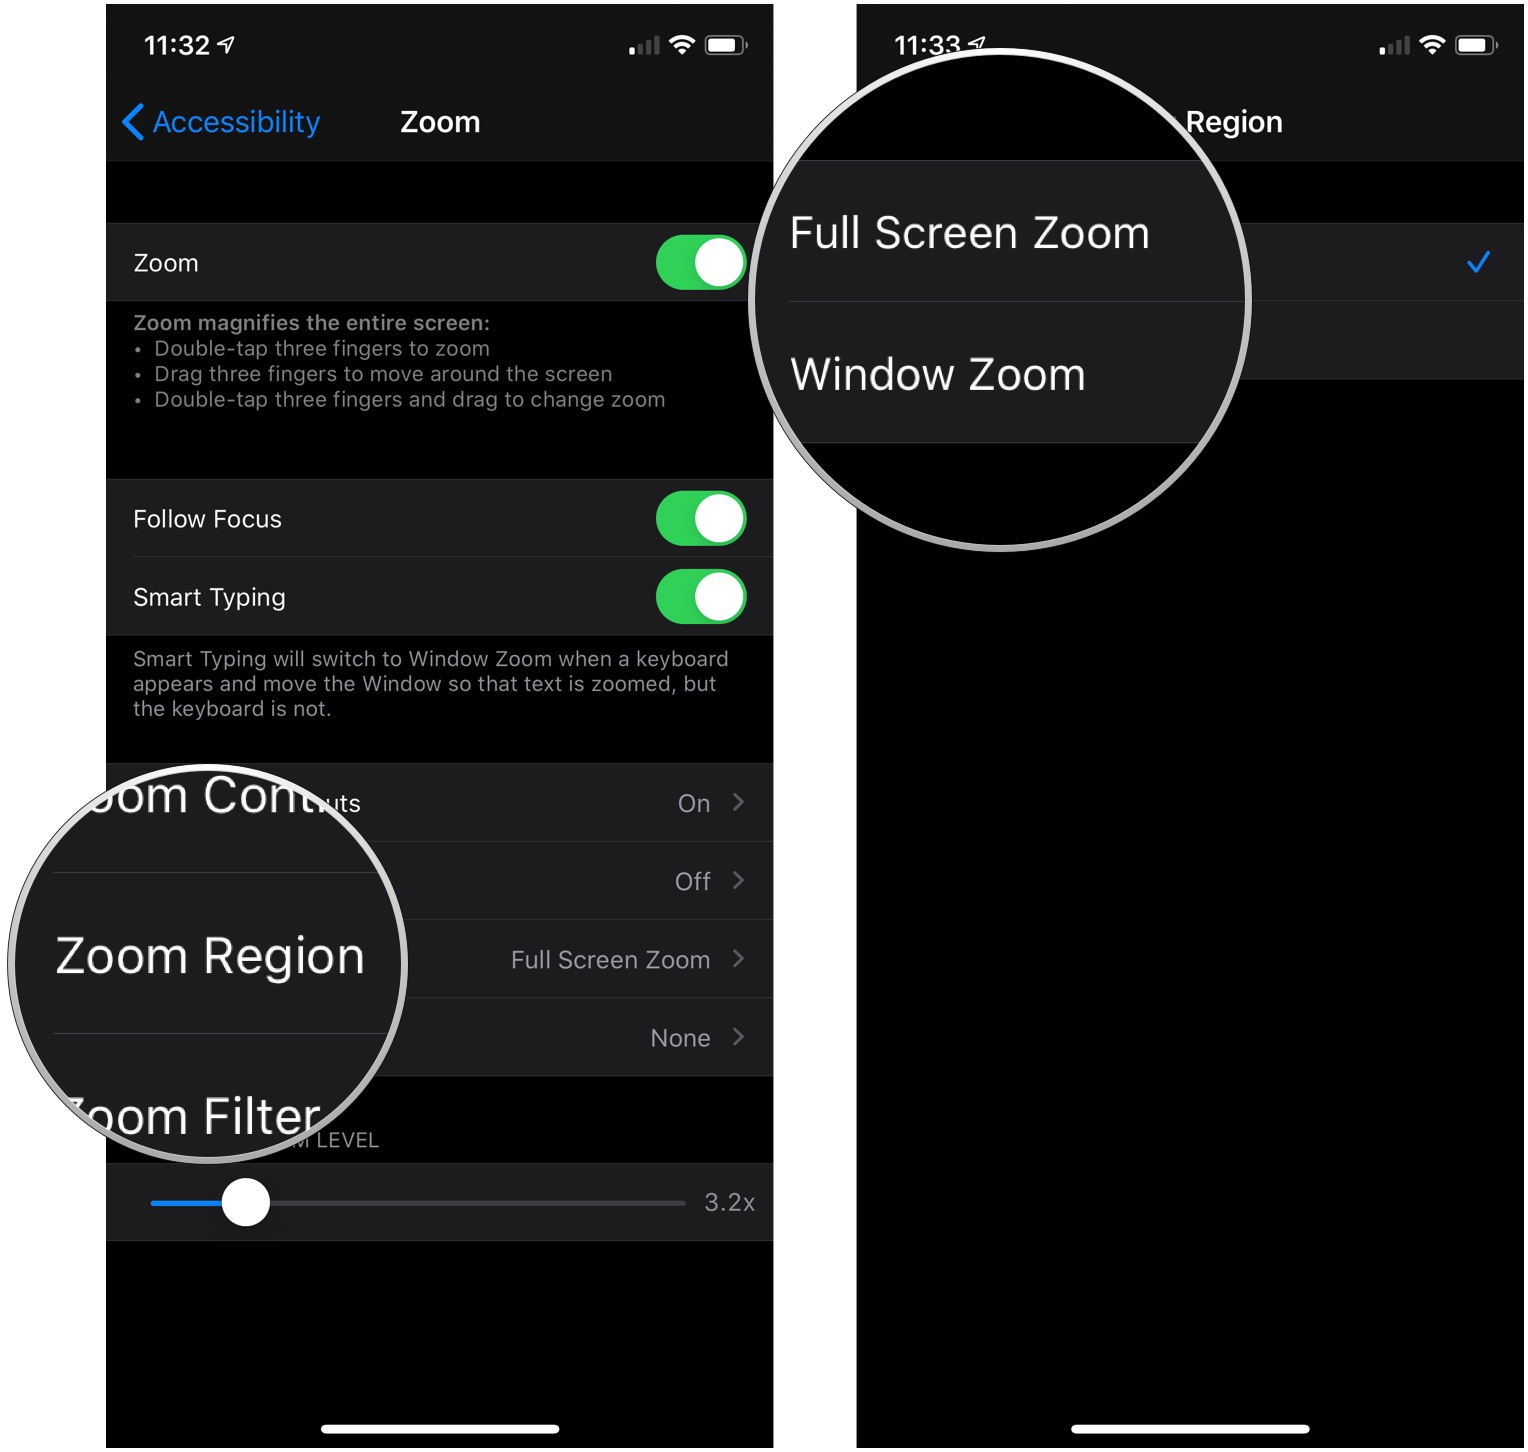 Change Zoom Region showing how to tap Zoom Region in the Zoom settings, then tap either Full Screen Zoom or Window Zoom